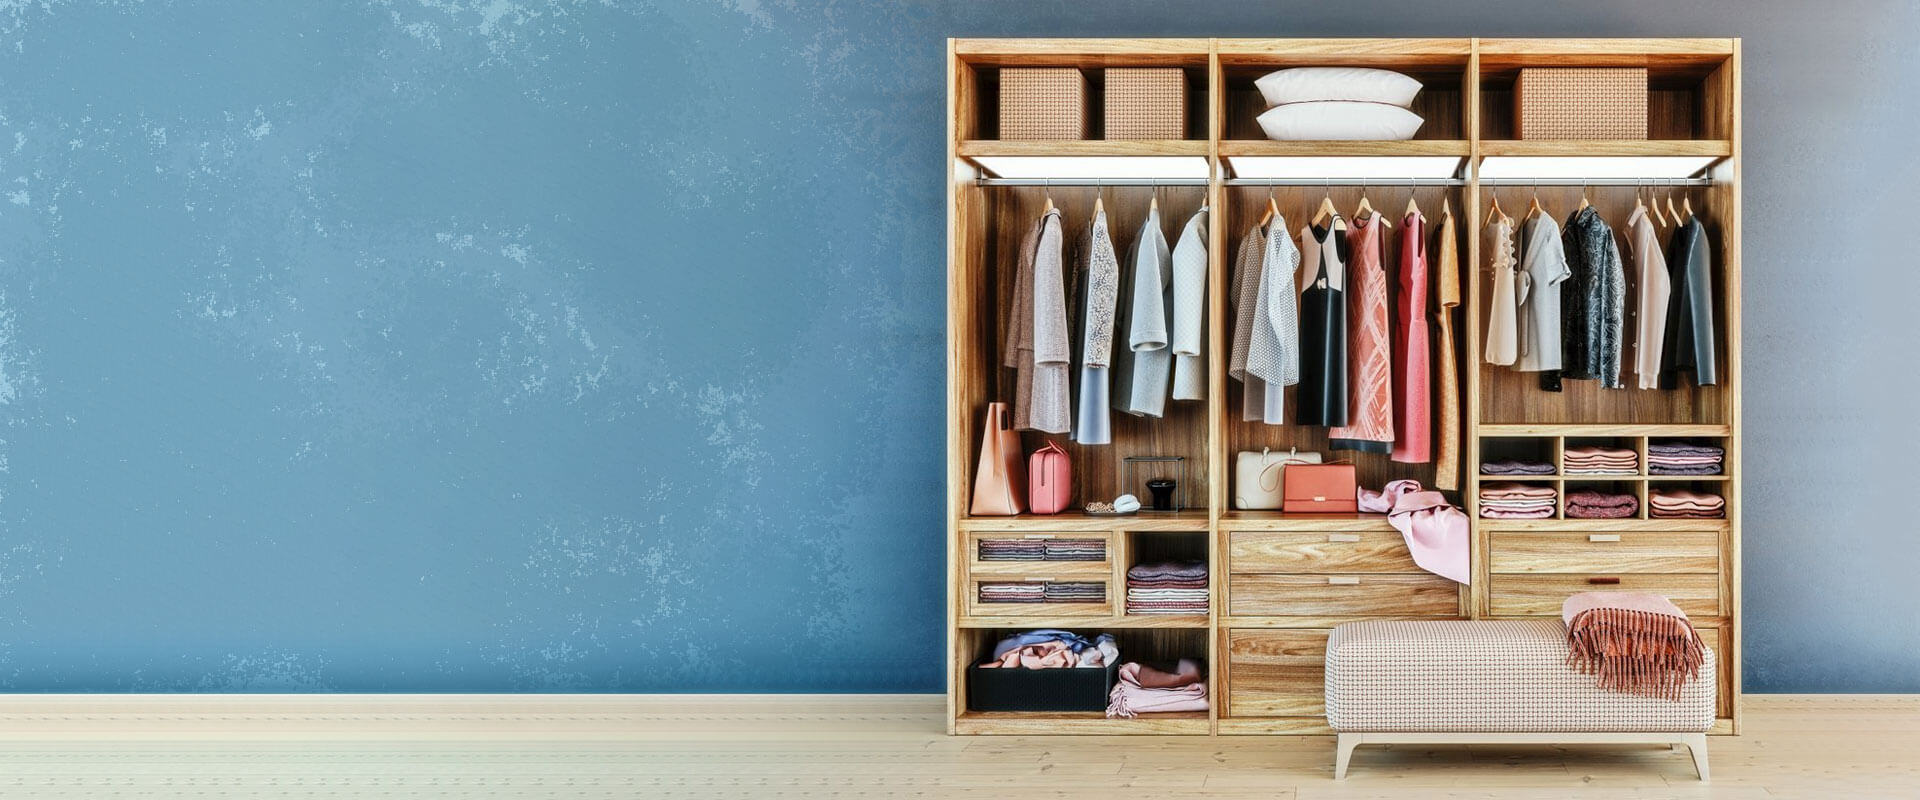 8 Best Space-Saving Hangers to Make More Room in Your Closet